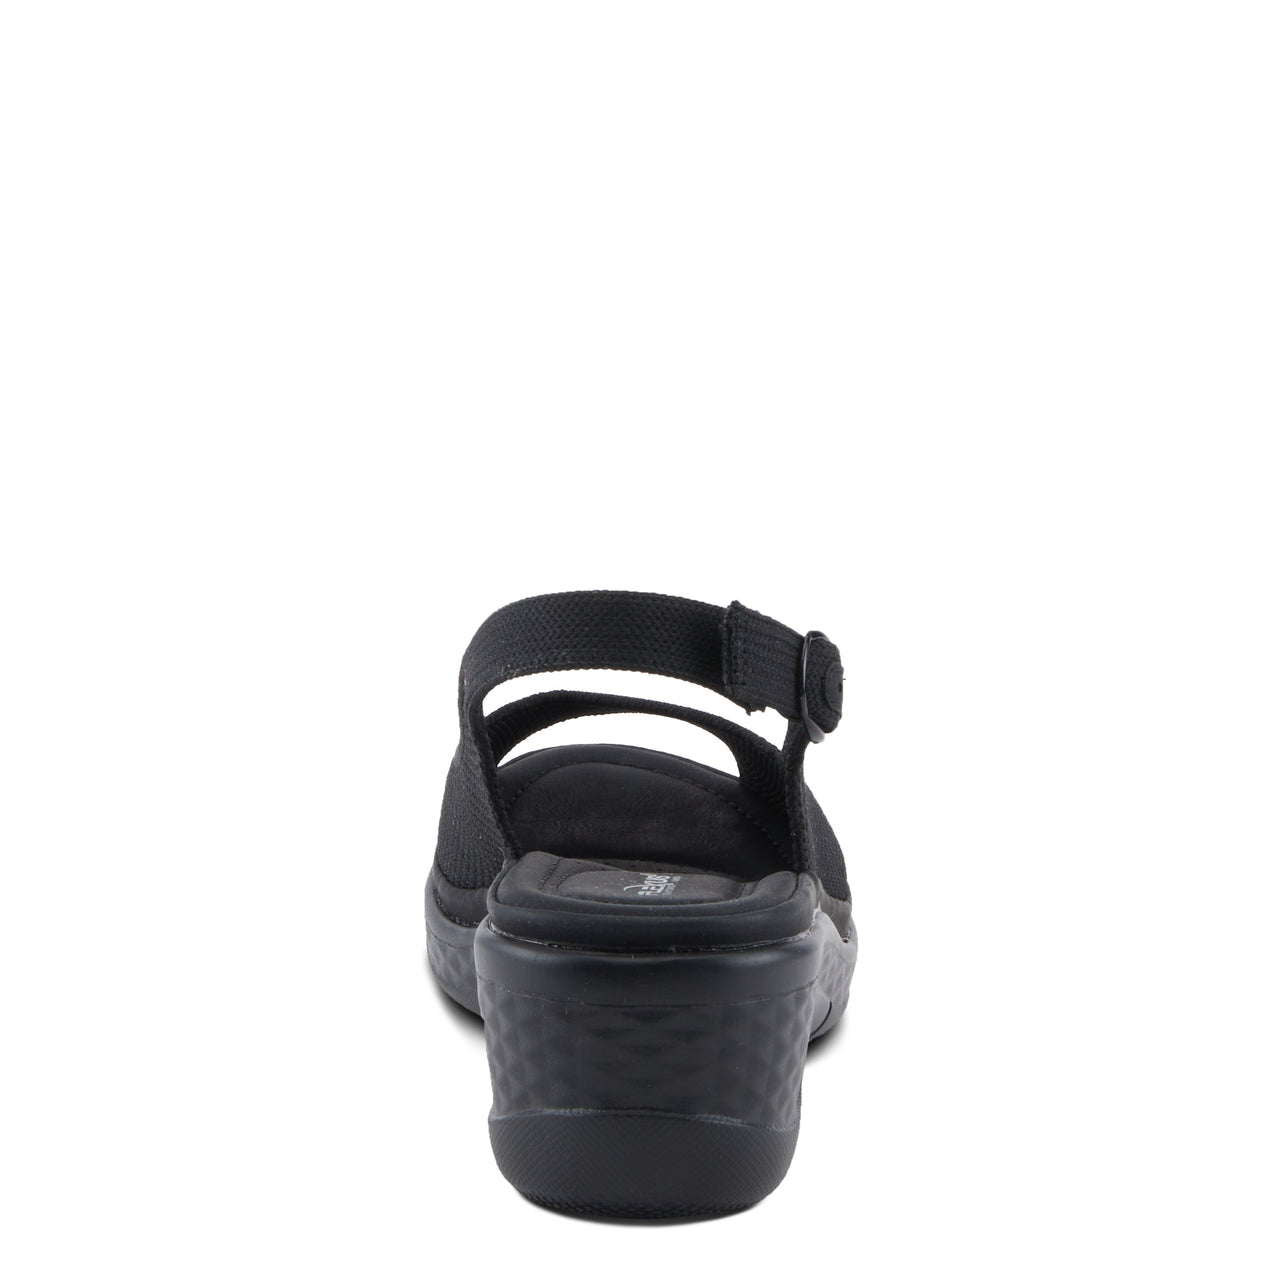 Black leather Spring Step Shoes Flexus Mayberry Sandals with adjustable straps and cushioned insole for all-day comfort